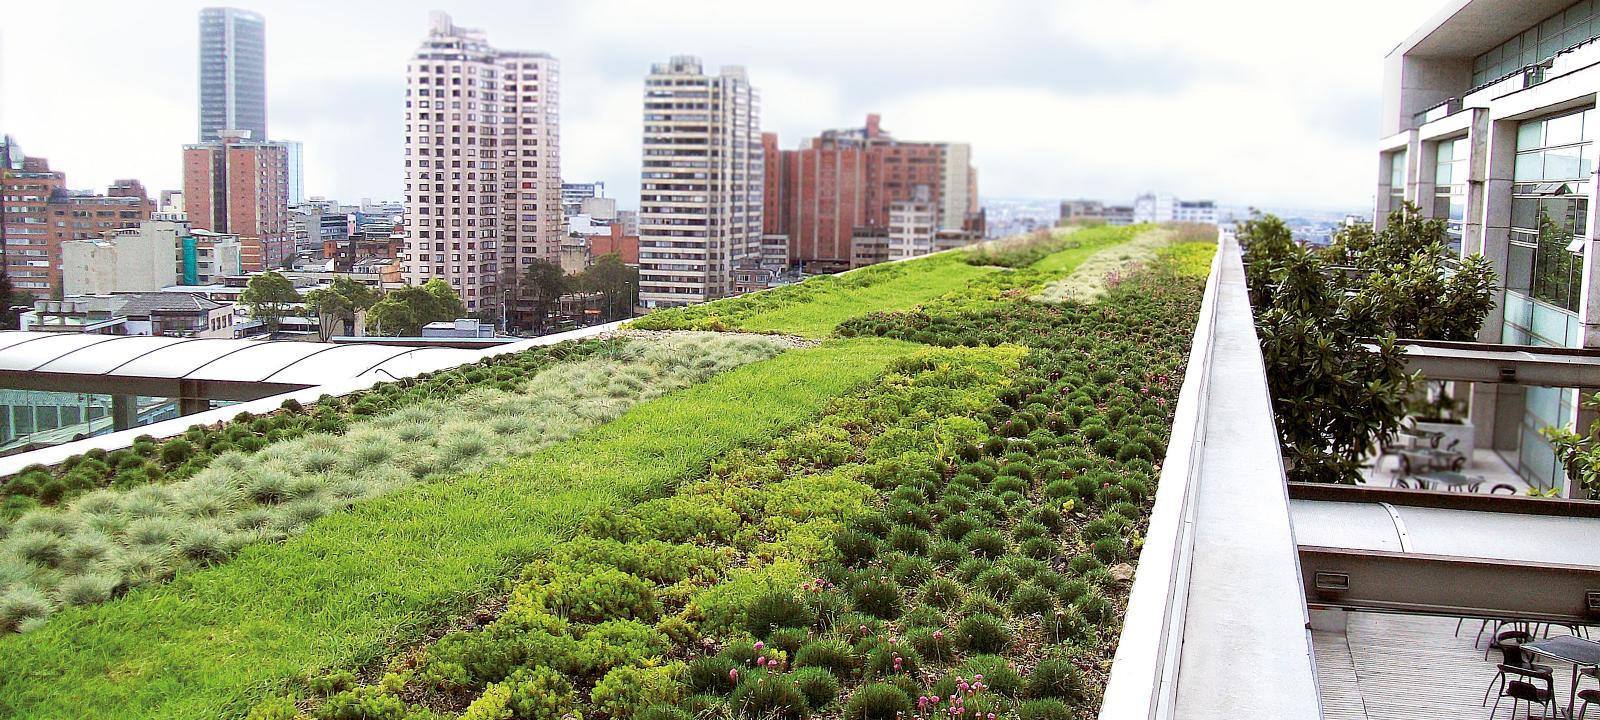 Extensive Green Roof - Urban Climate Roof